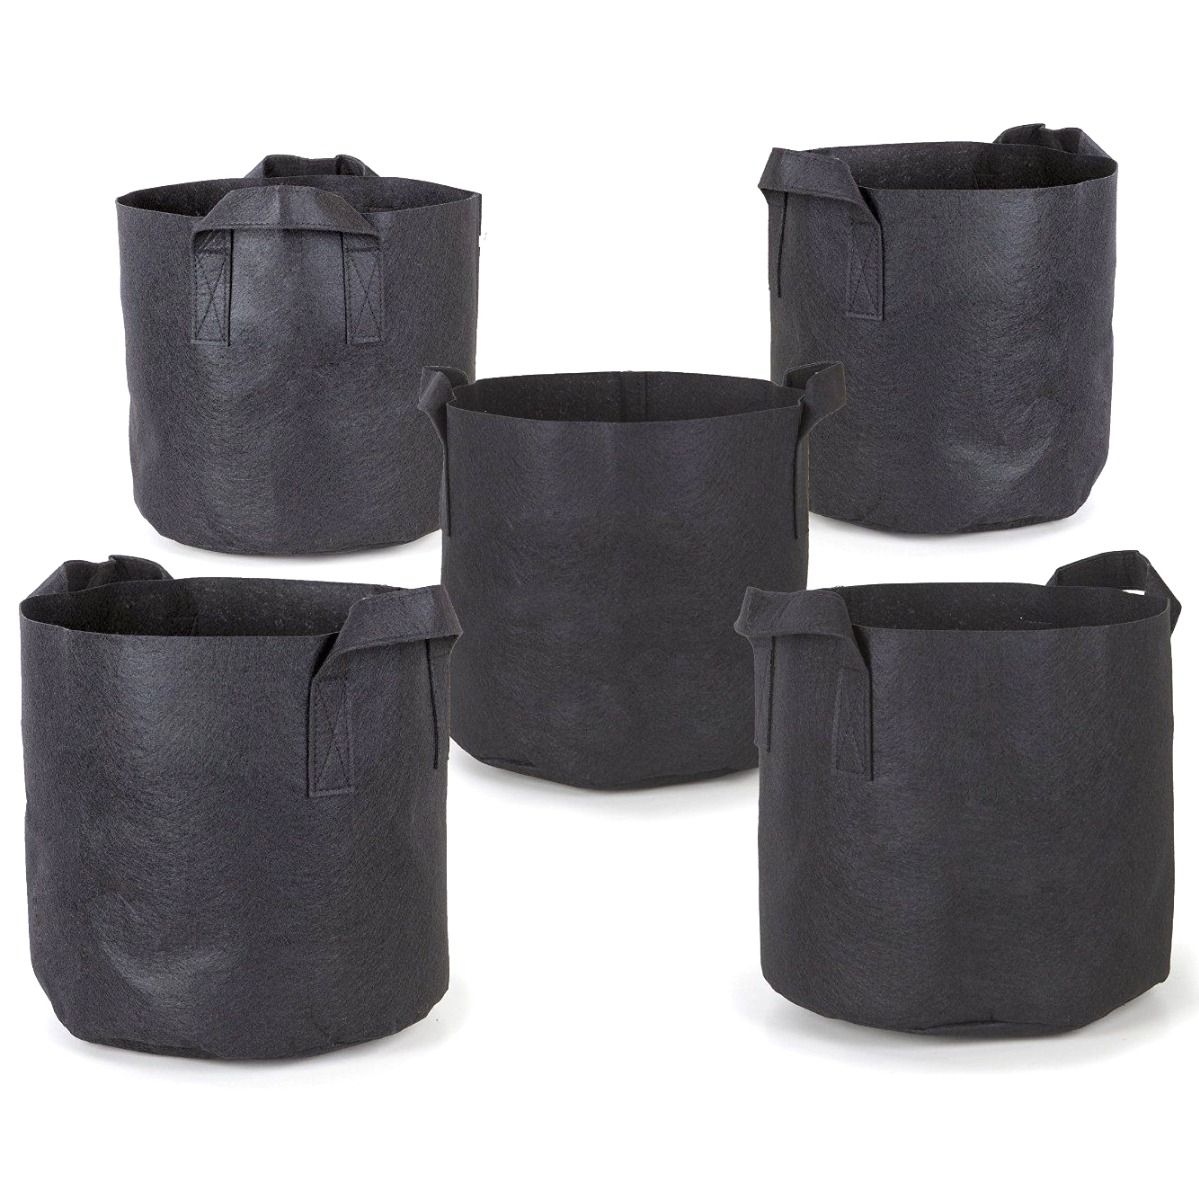 Potato Black Thickened Felt Fabric Pots with Reinforced Handles Lettuce LotFancy 3 Gallon Grow Bags Vegetables Planter Containers for Tomato 7-Pack 